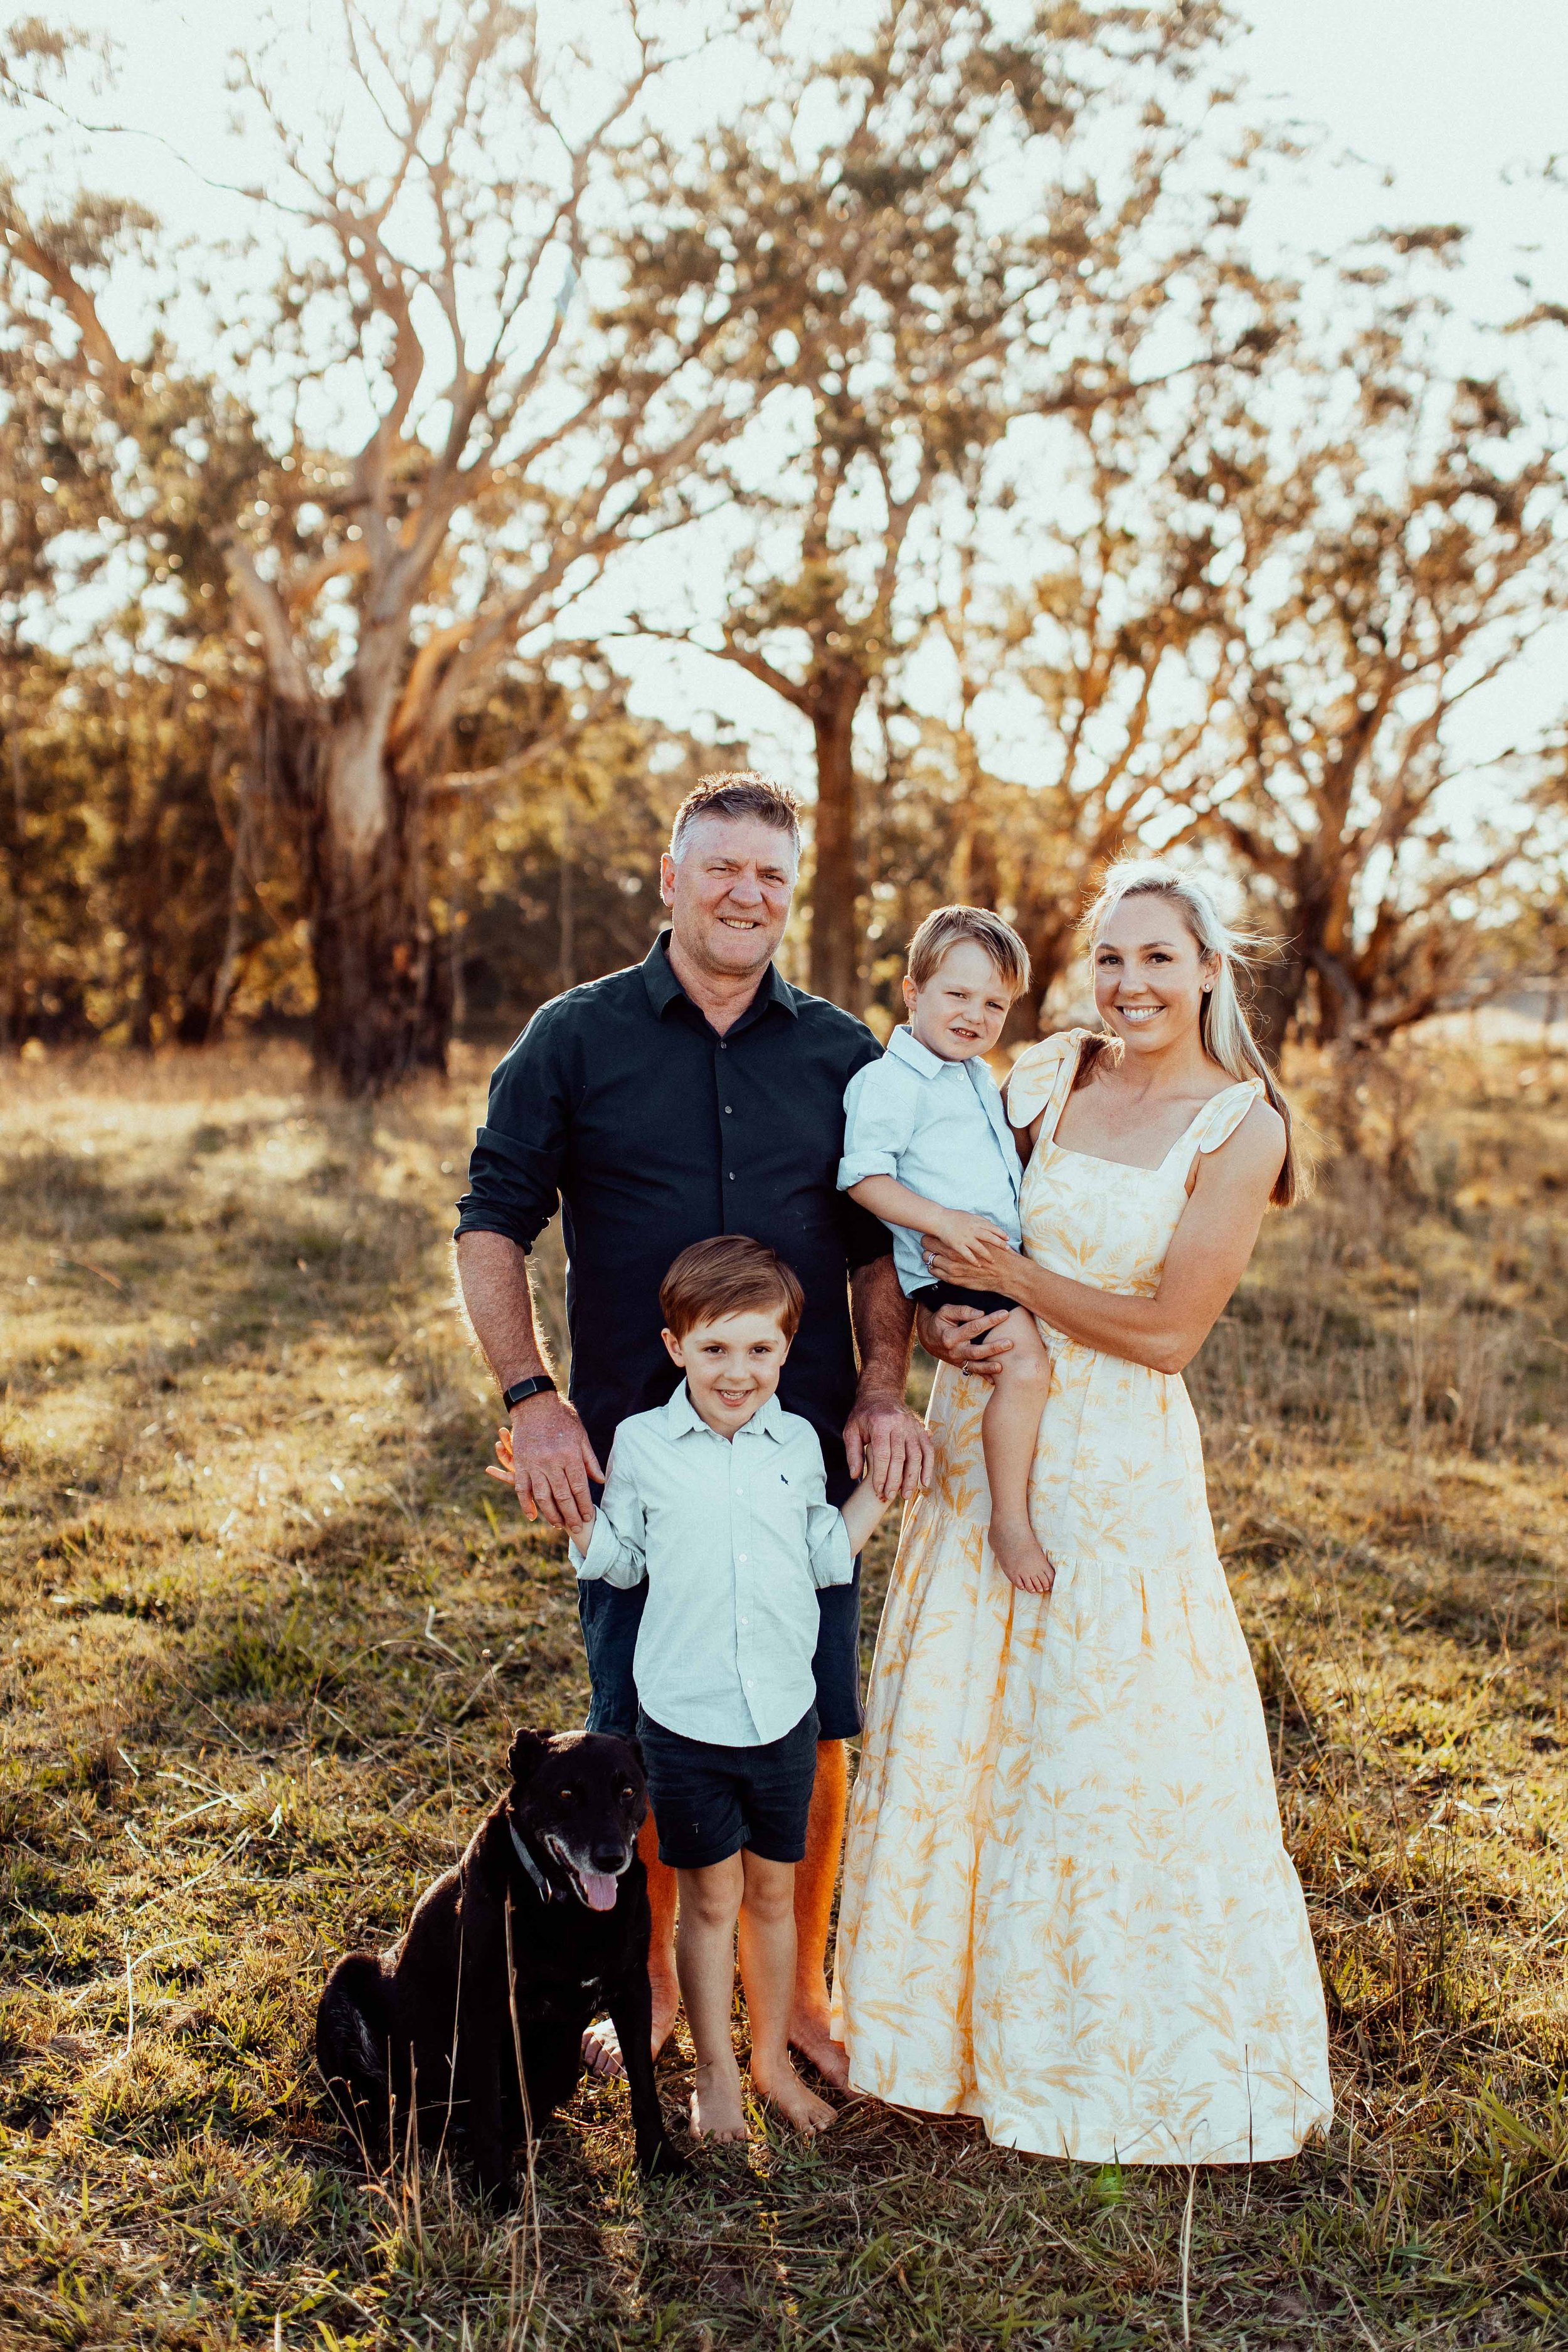 durney-family-exeter-southern-highlands-bowral-inhome-family-lifestyle-wollondilly-camden-macarthur-sydney-photography-www.emilyobrienphotography.net-6.jpg